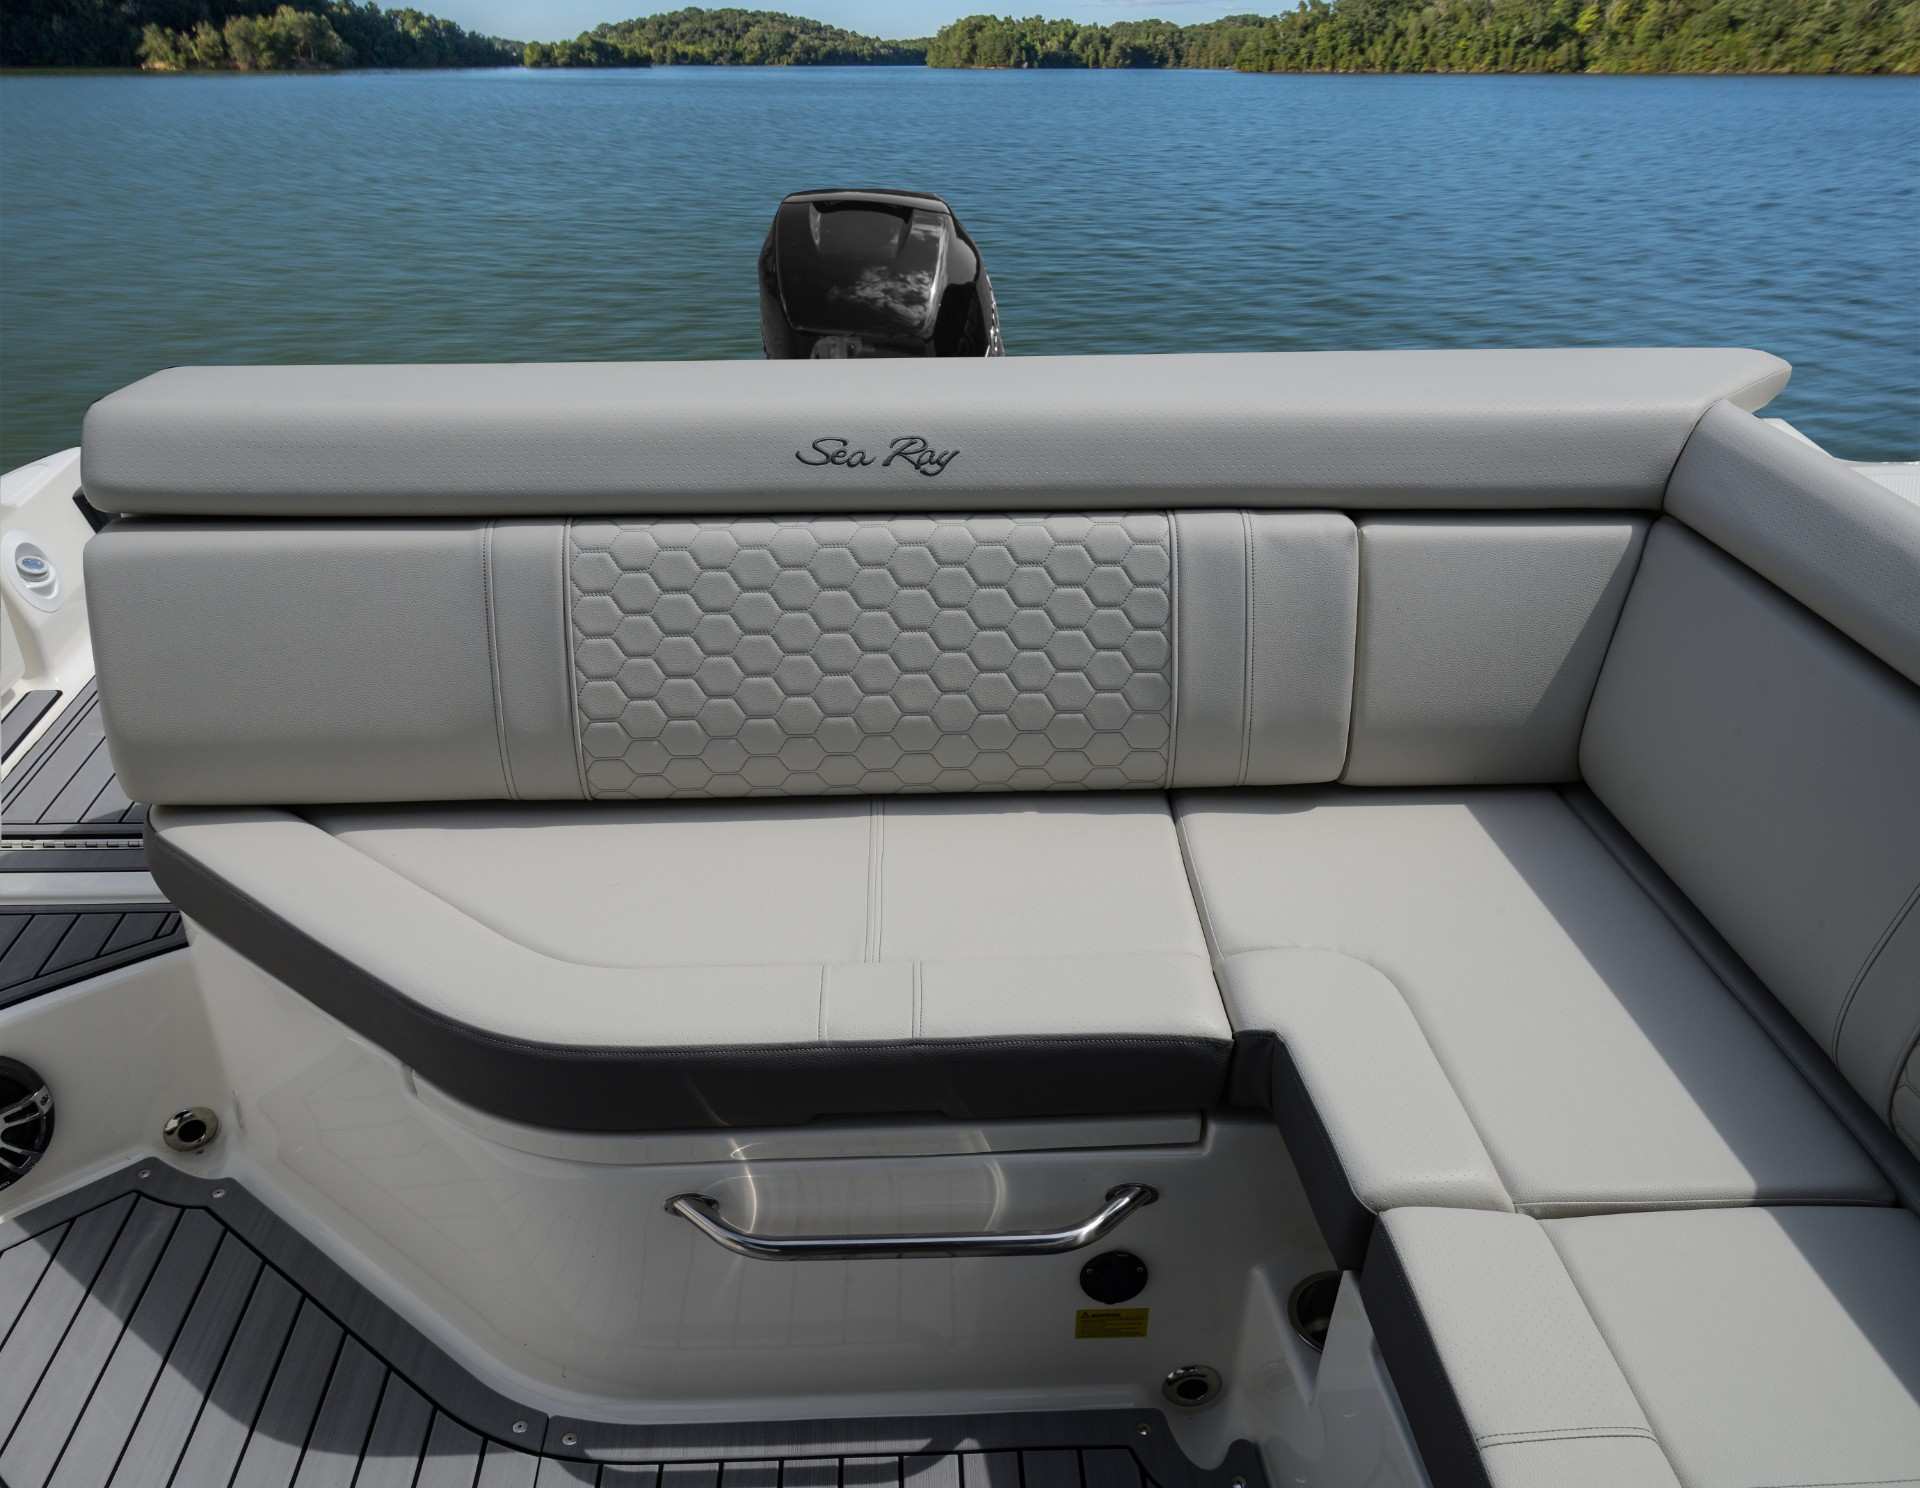 SDX 270 Outboard cockpit seating stone interior